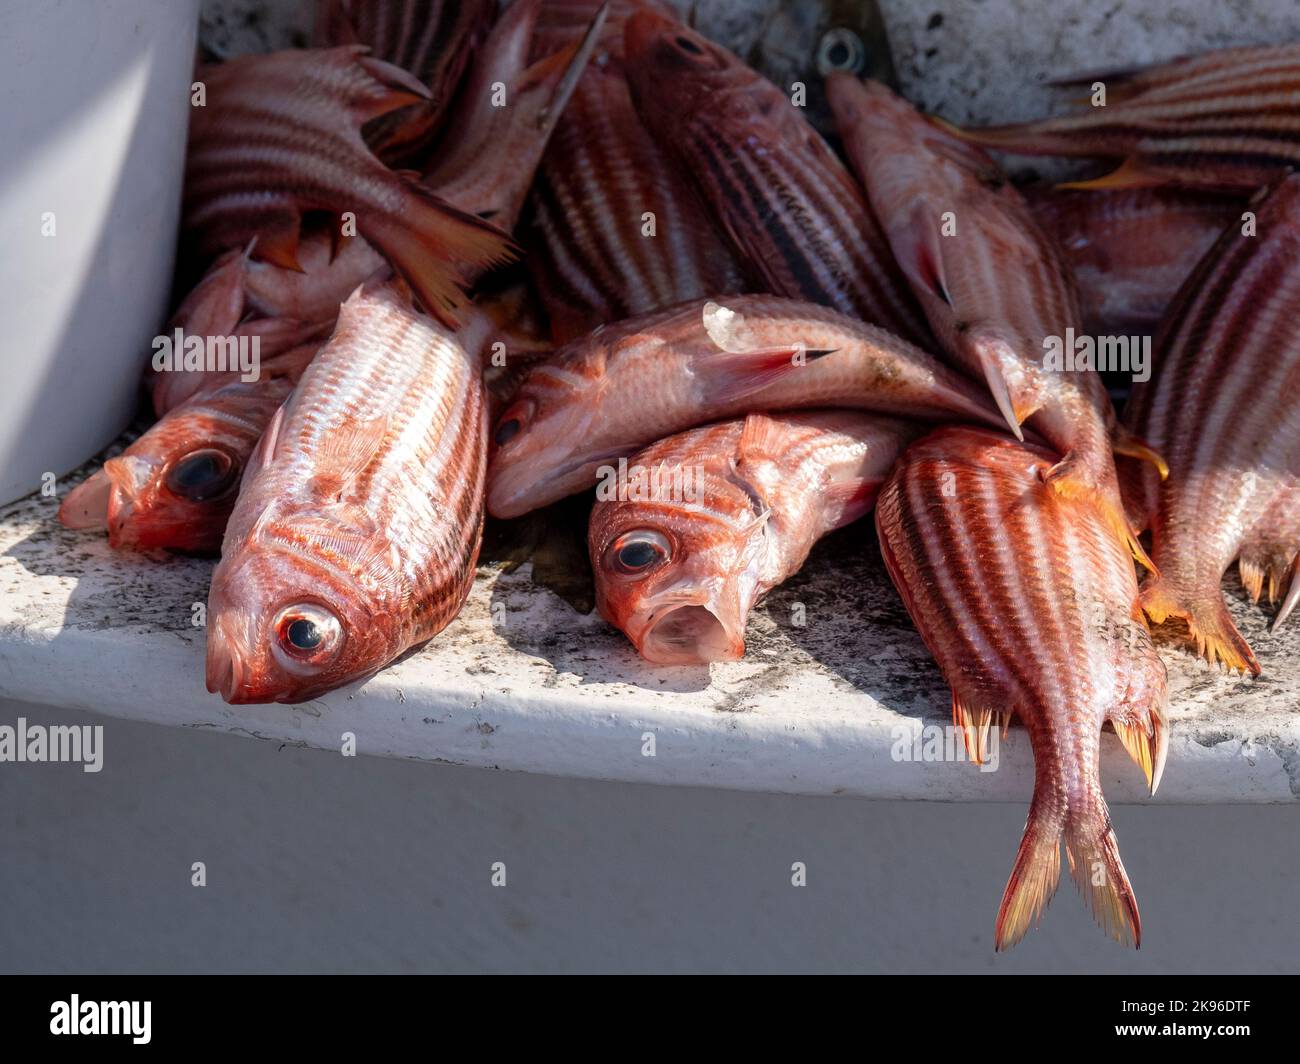 Freshly Red Striped Squirrel fish (Sargocentron rubrum) on a Fishermans boat, Agios Gorgeous harbour, Cyprus. Stock Photo